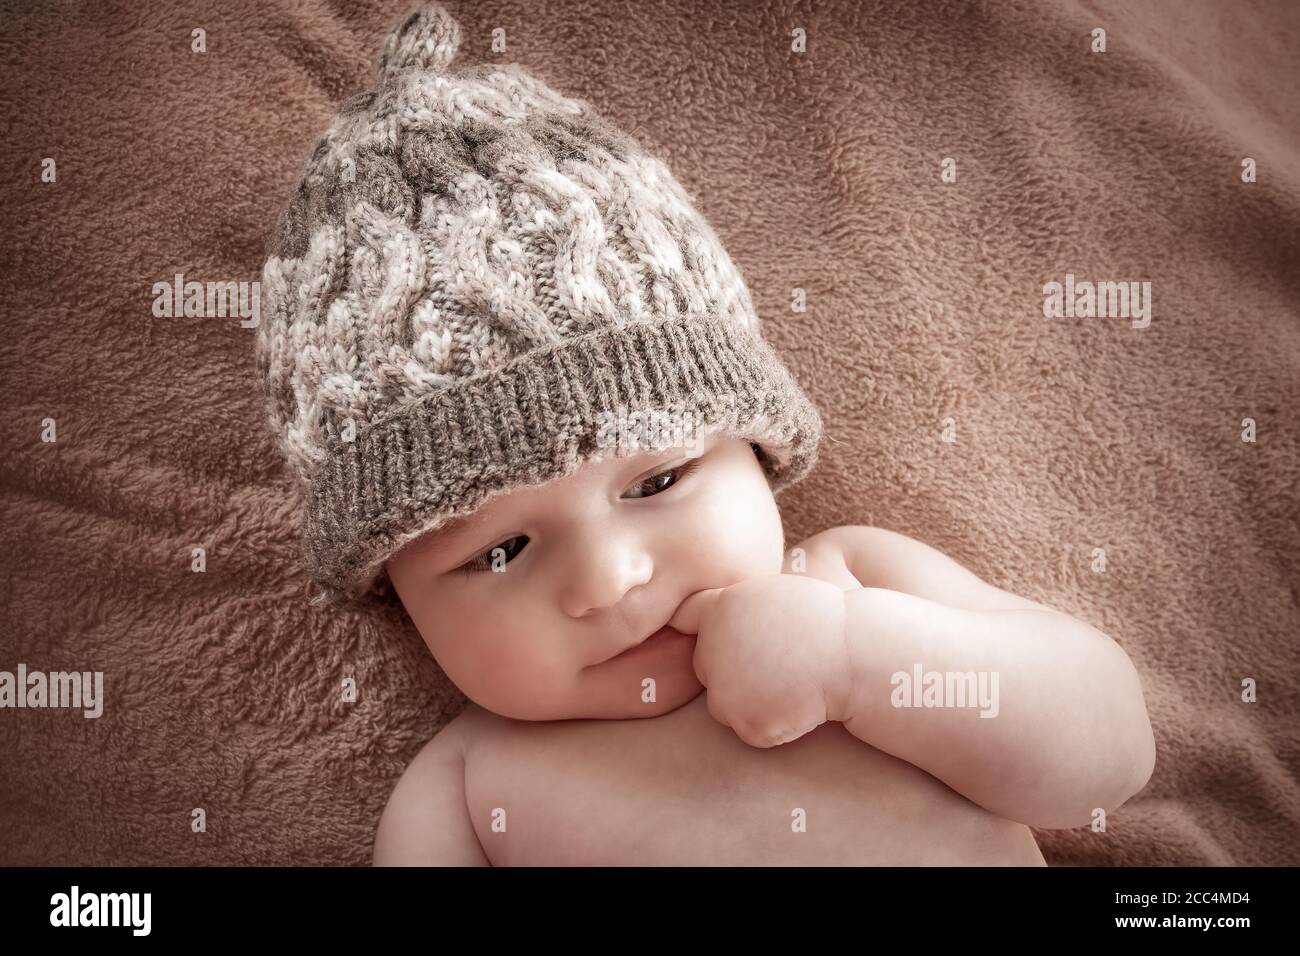 baby in hat on brown fur background Stock Photo